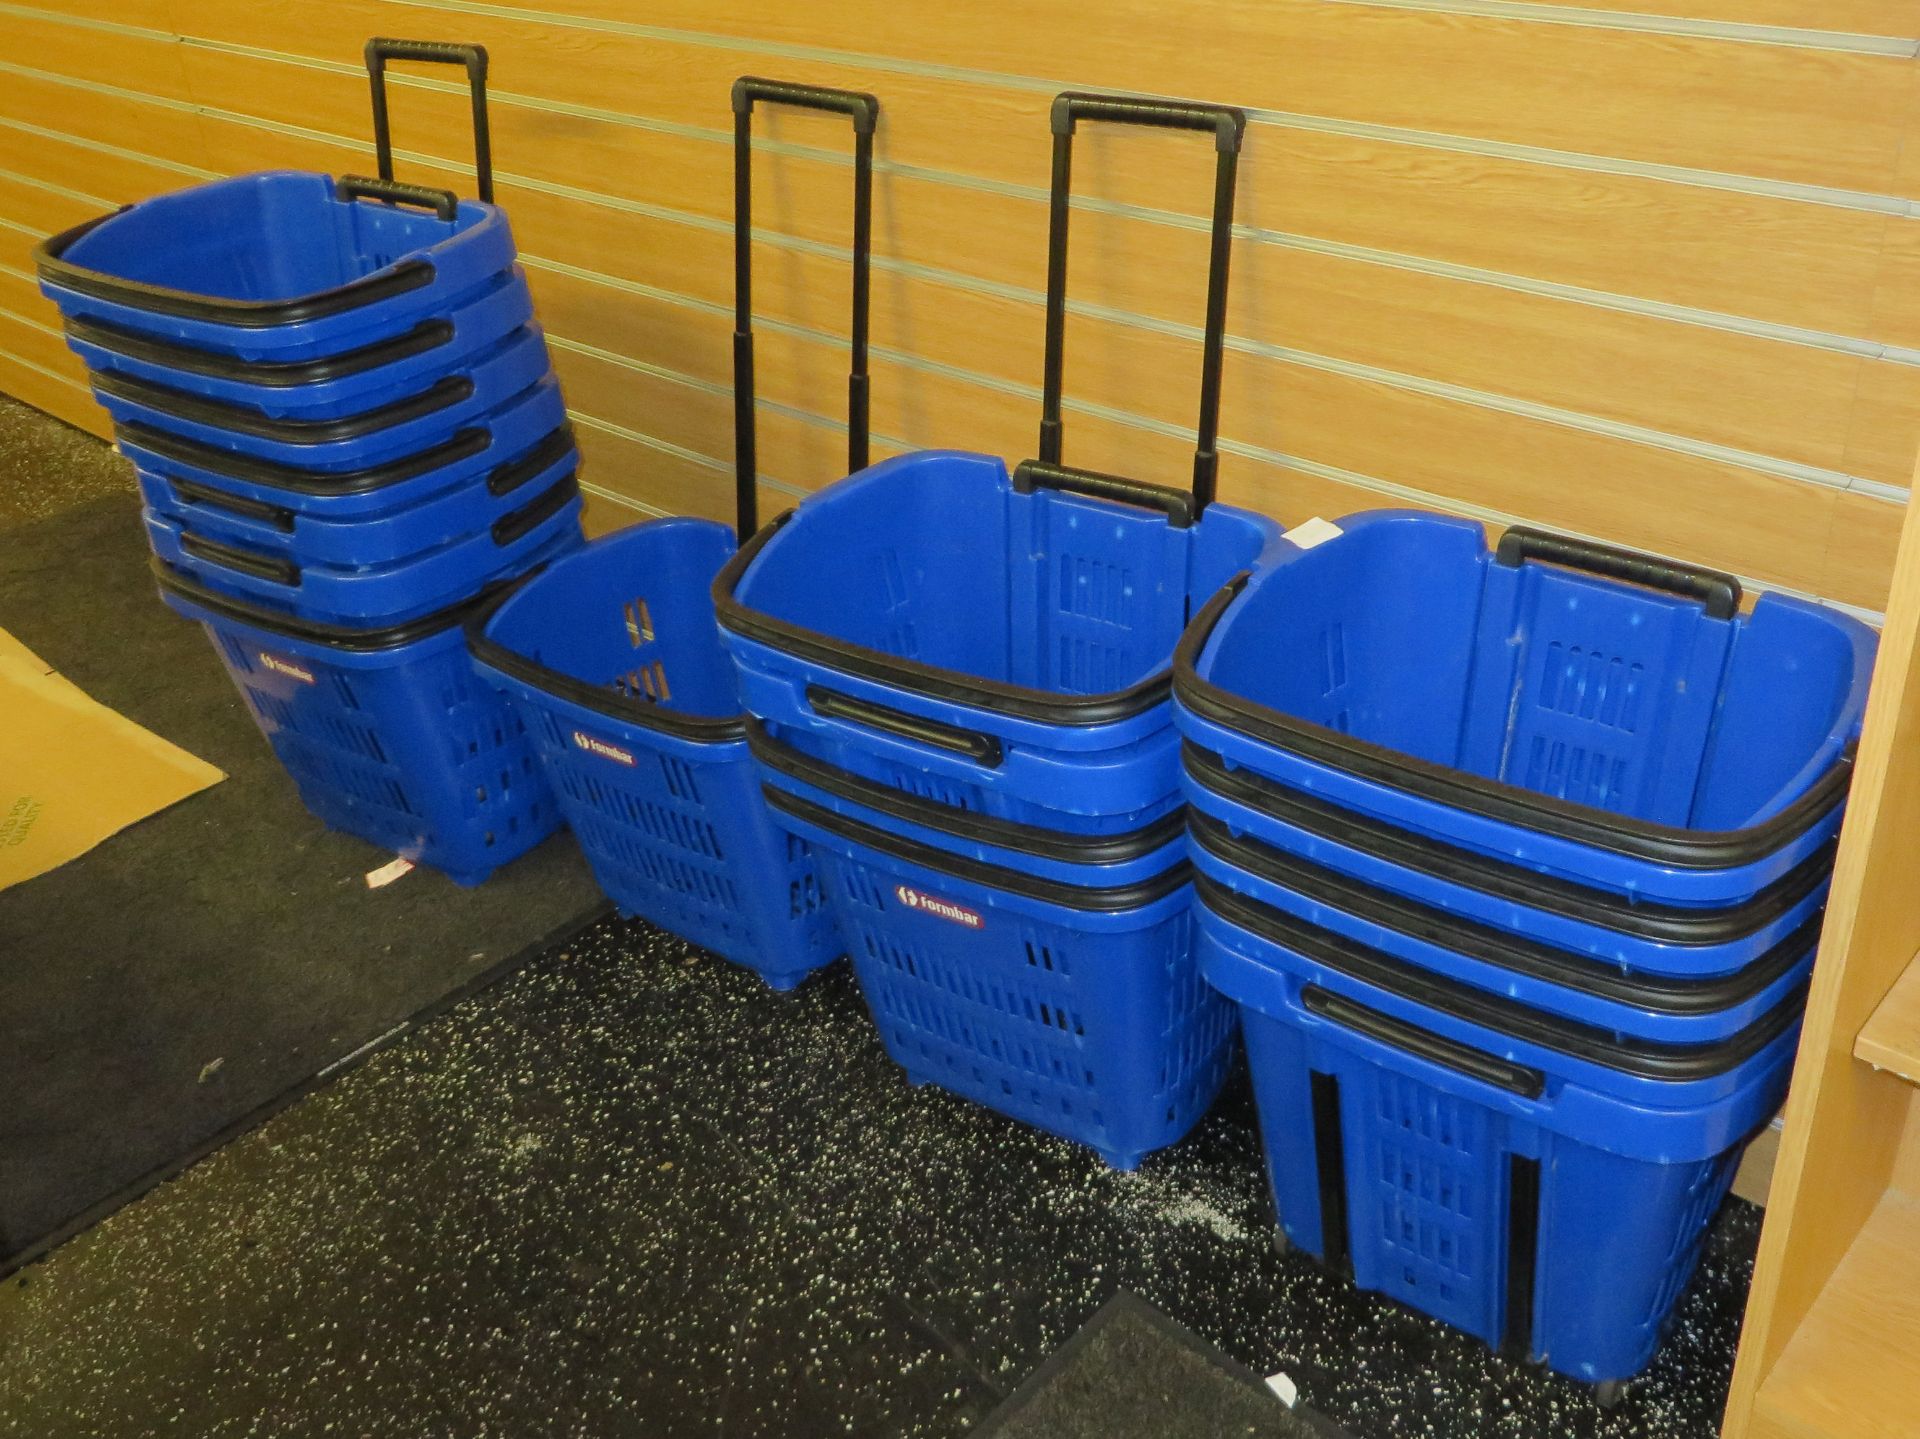 17 x Blue Wheeled Shopping Baskets with Extendable Handles - Ref: 023 - CL173 - Location: Altrincham - Image 4 of 4